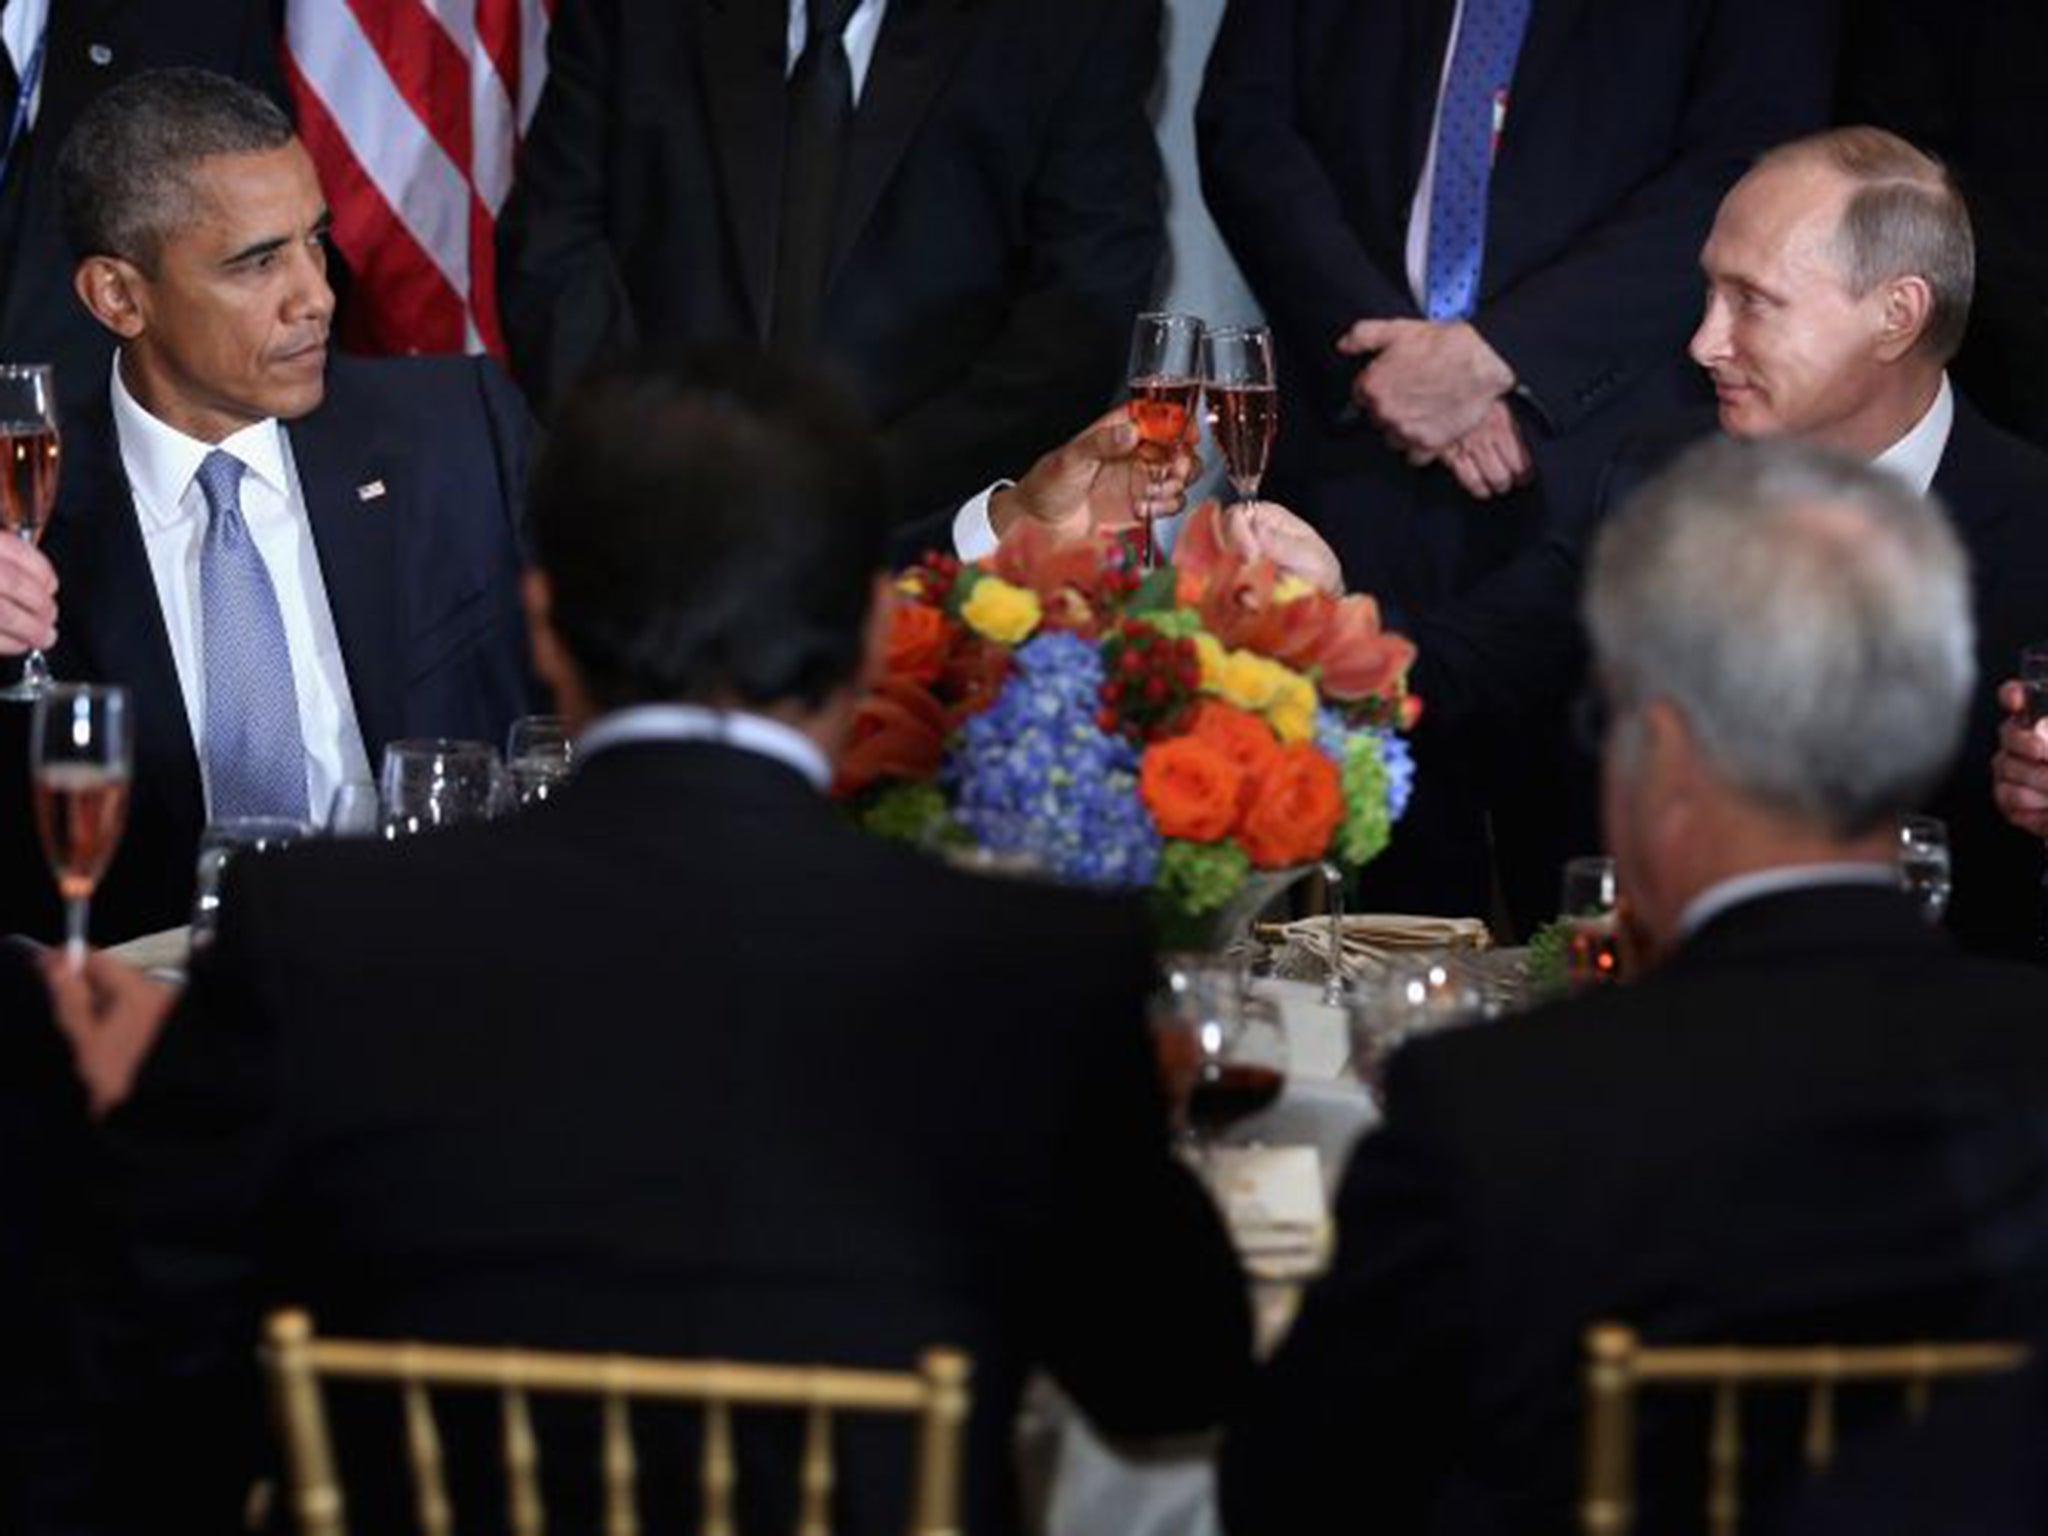 Barack Obama and Vladimir Putin toast during a luncheon hosted by UN Secretary-General Ban Ki-moon during the 70th annual UN General Assembly